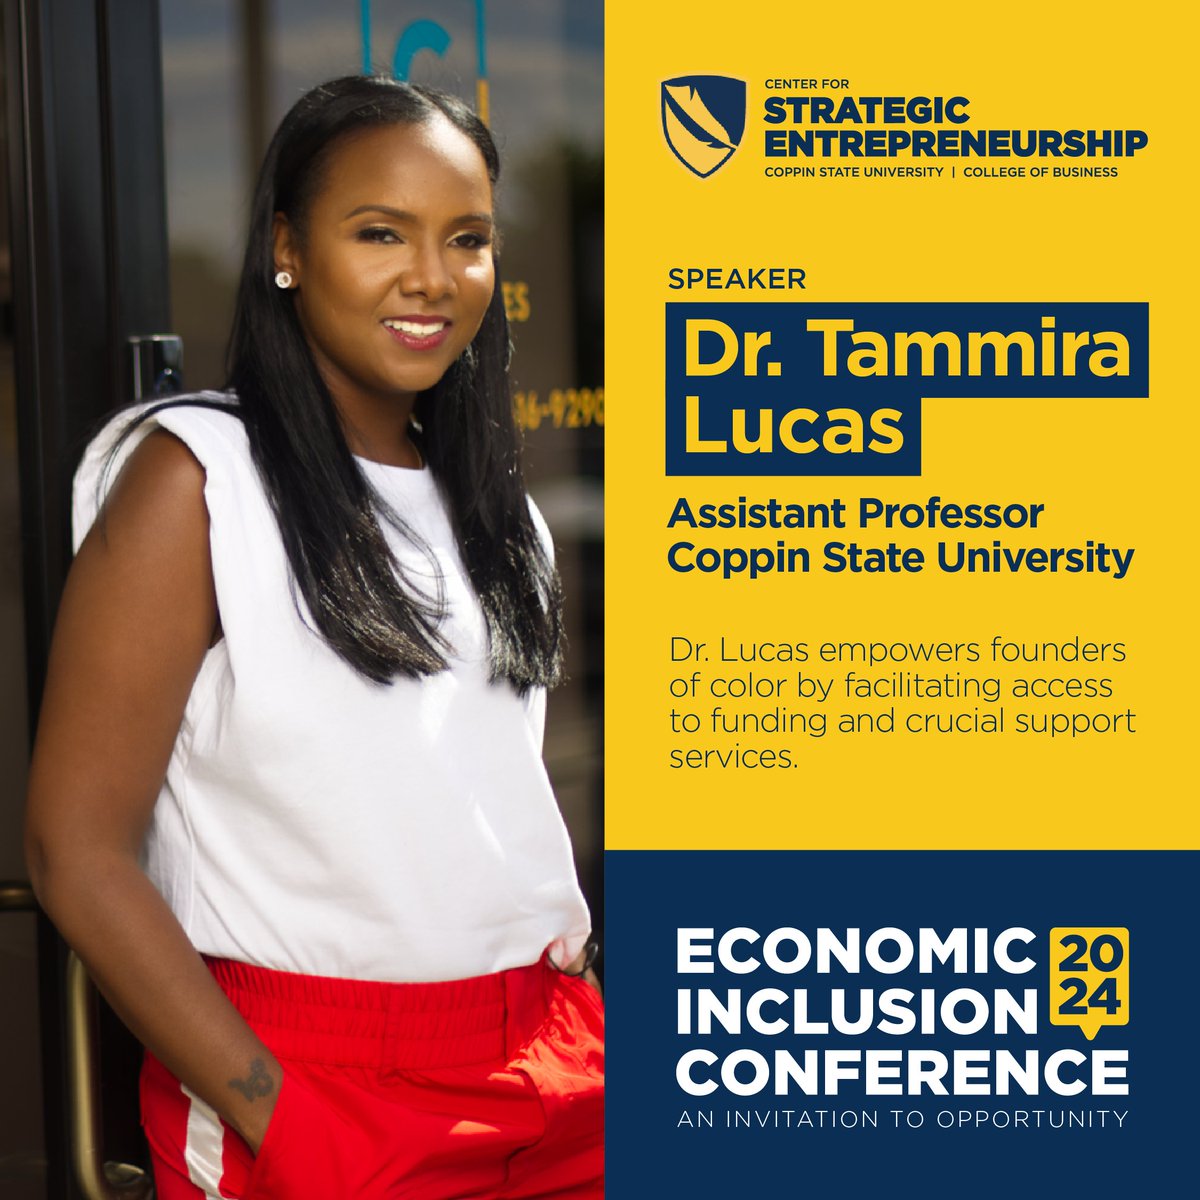 Learn from Dr. Tammira Lucas: Championing Inclusive Entrepreneurship at EICAC 2024! Dr. Lucas will be discussing inclusive entrepreneurship at EICAC 2024. Don't miss this opportunity to gain insights from her expertise! Register now: coppin.edu/eicac #EICAC2024